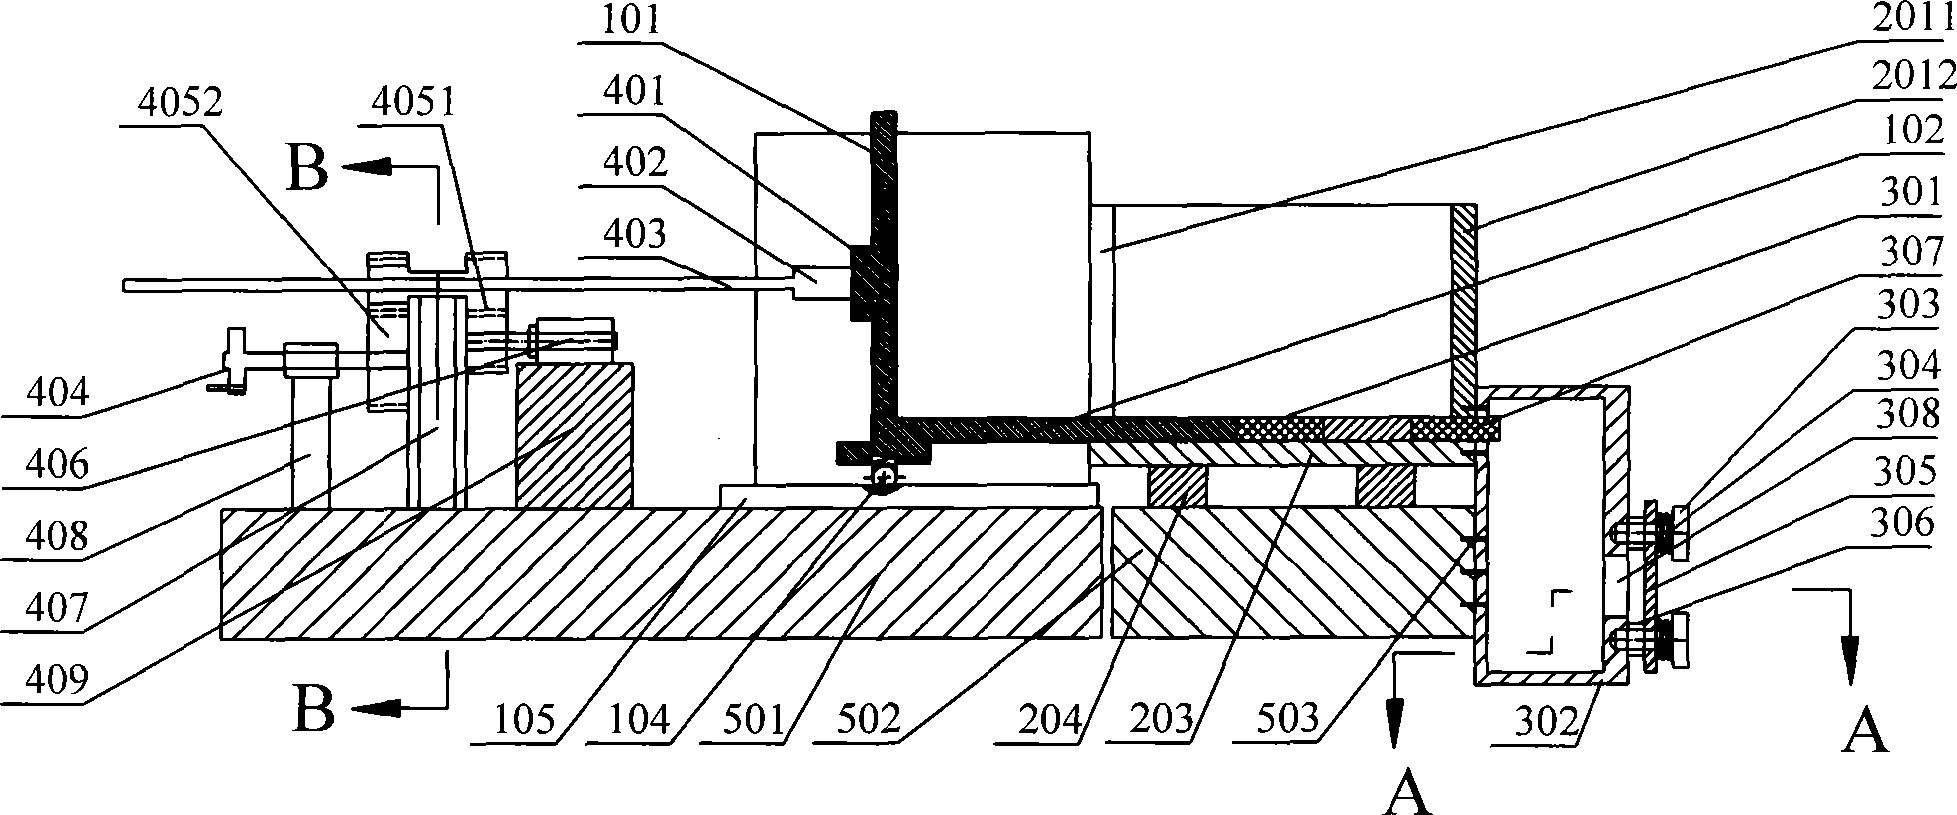 Omnidirectional observation apparatus and method of bank erosion collapse